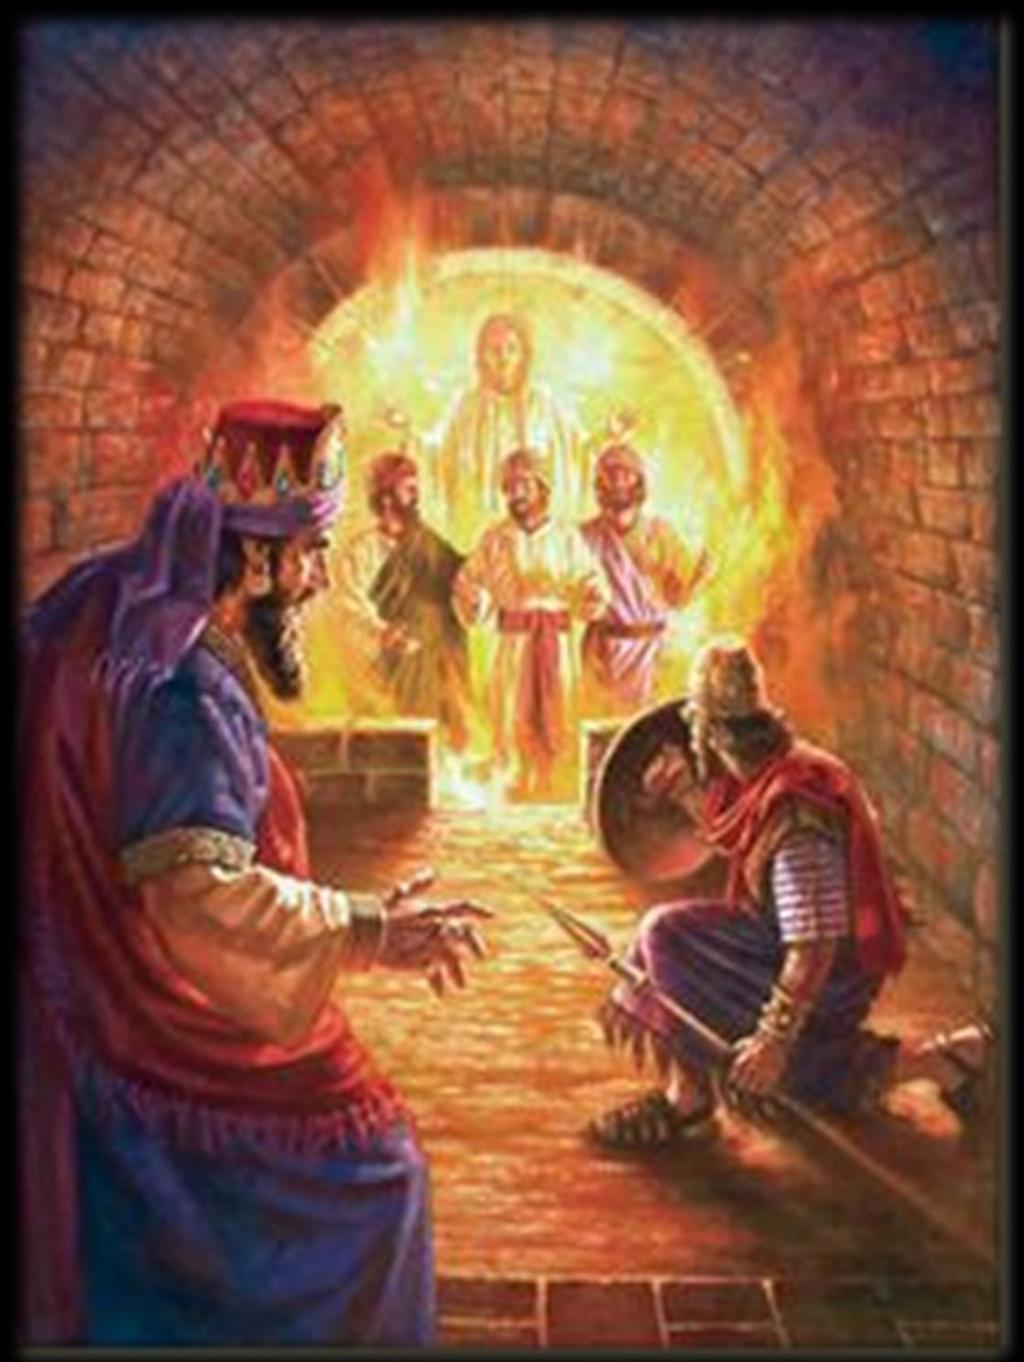 The king sees Christ, the fourth person in the fire,